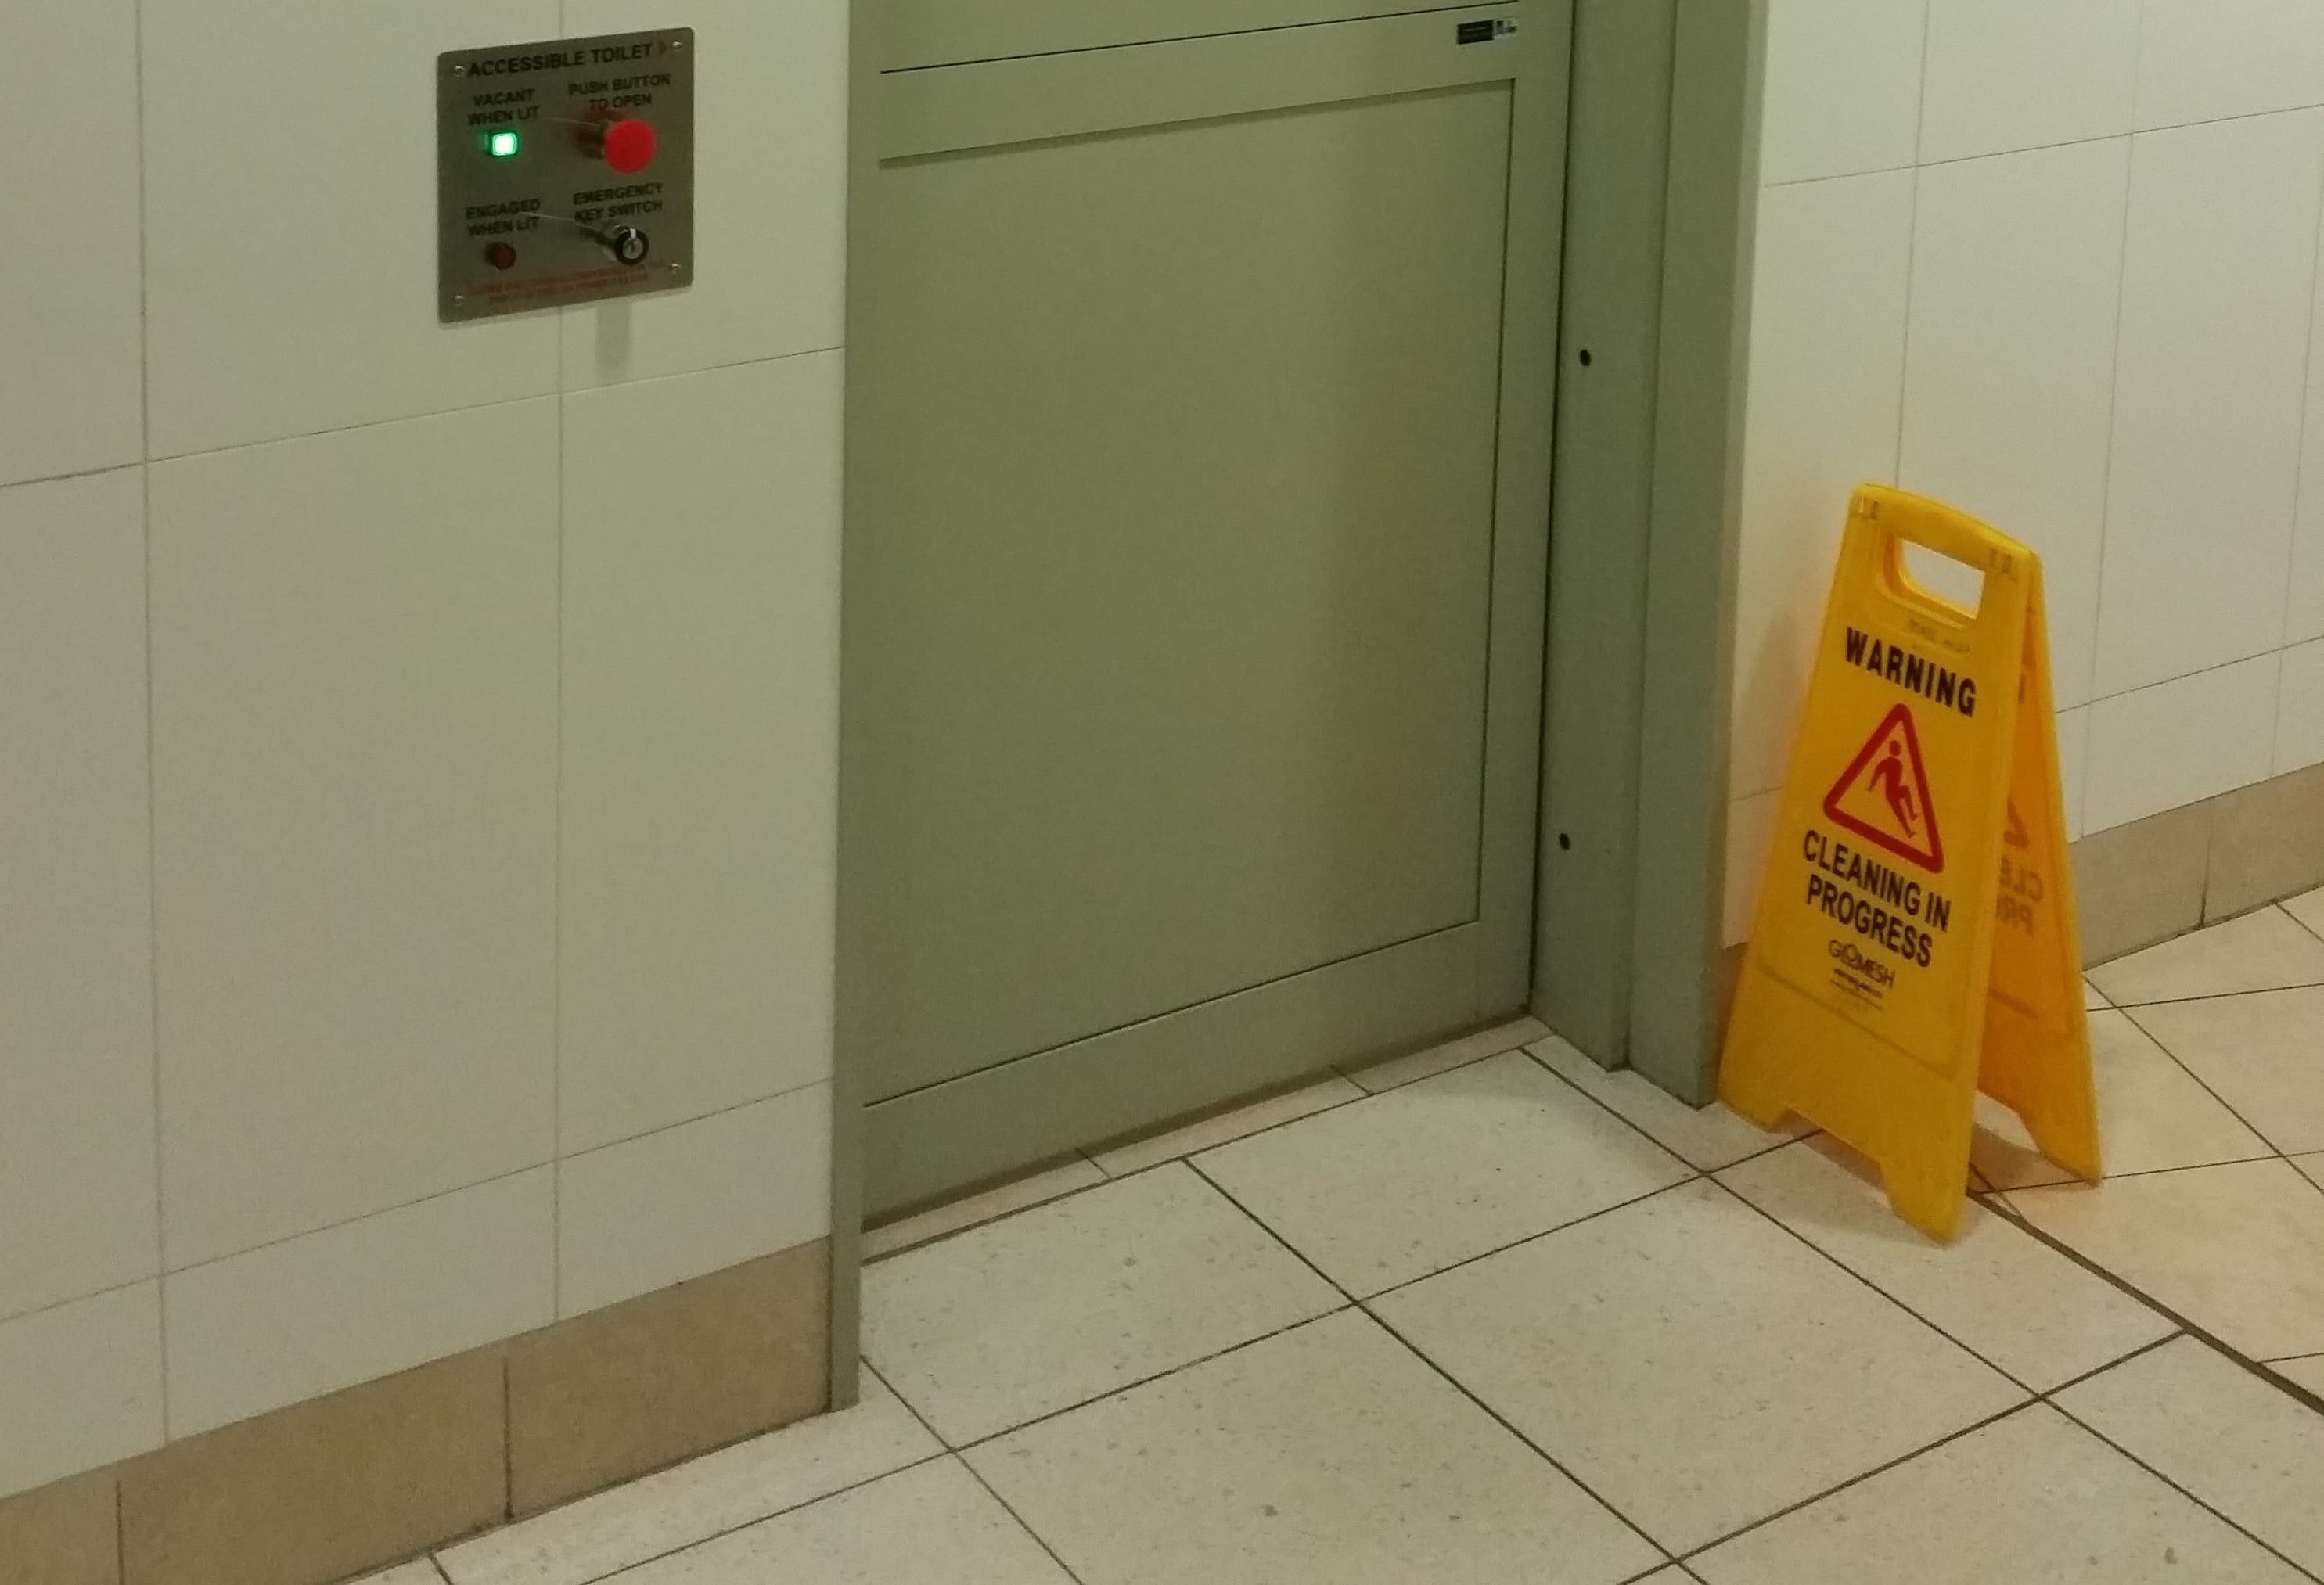 The mall toilet at Westfield Manukau, where a man was found with a mystery substance that led to three hospitalisations.